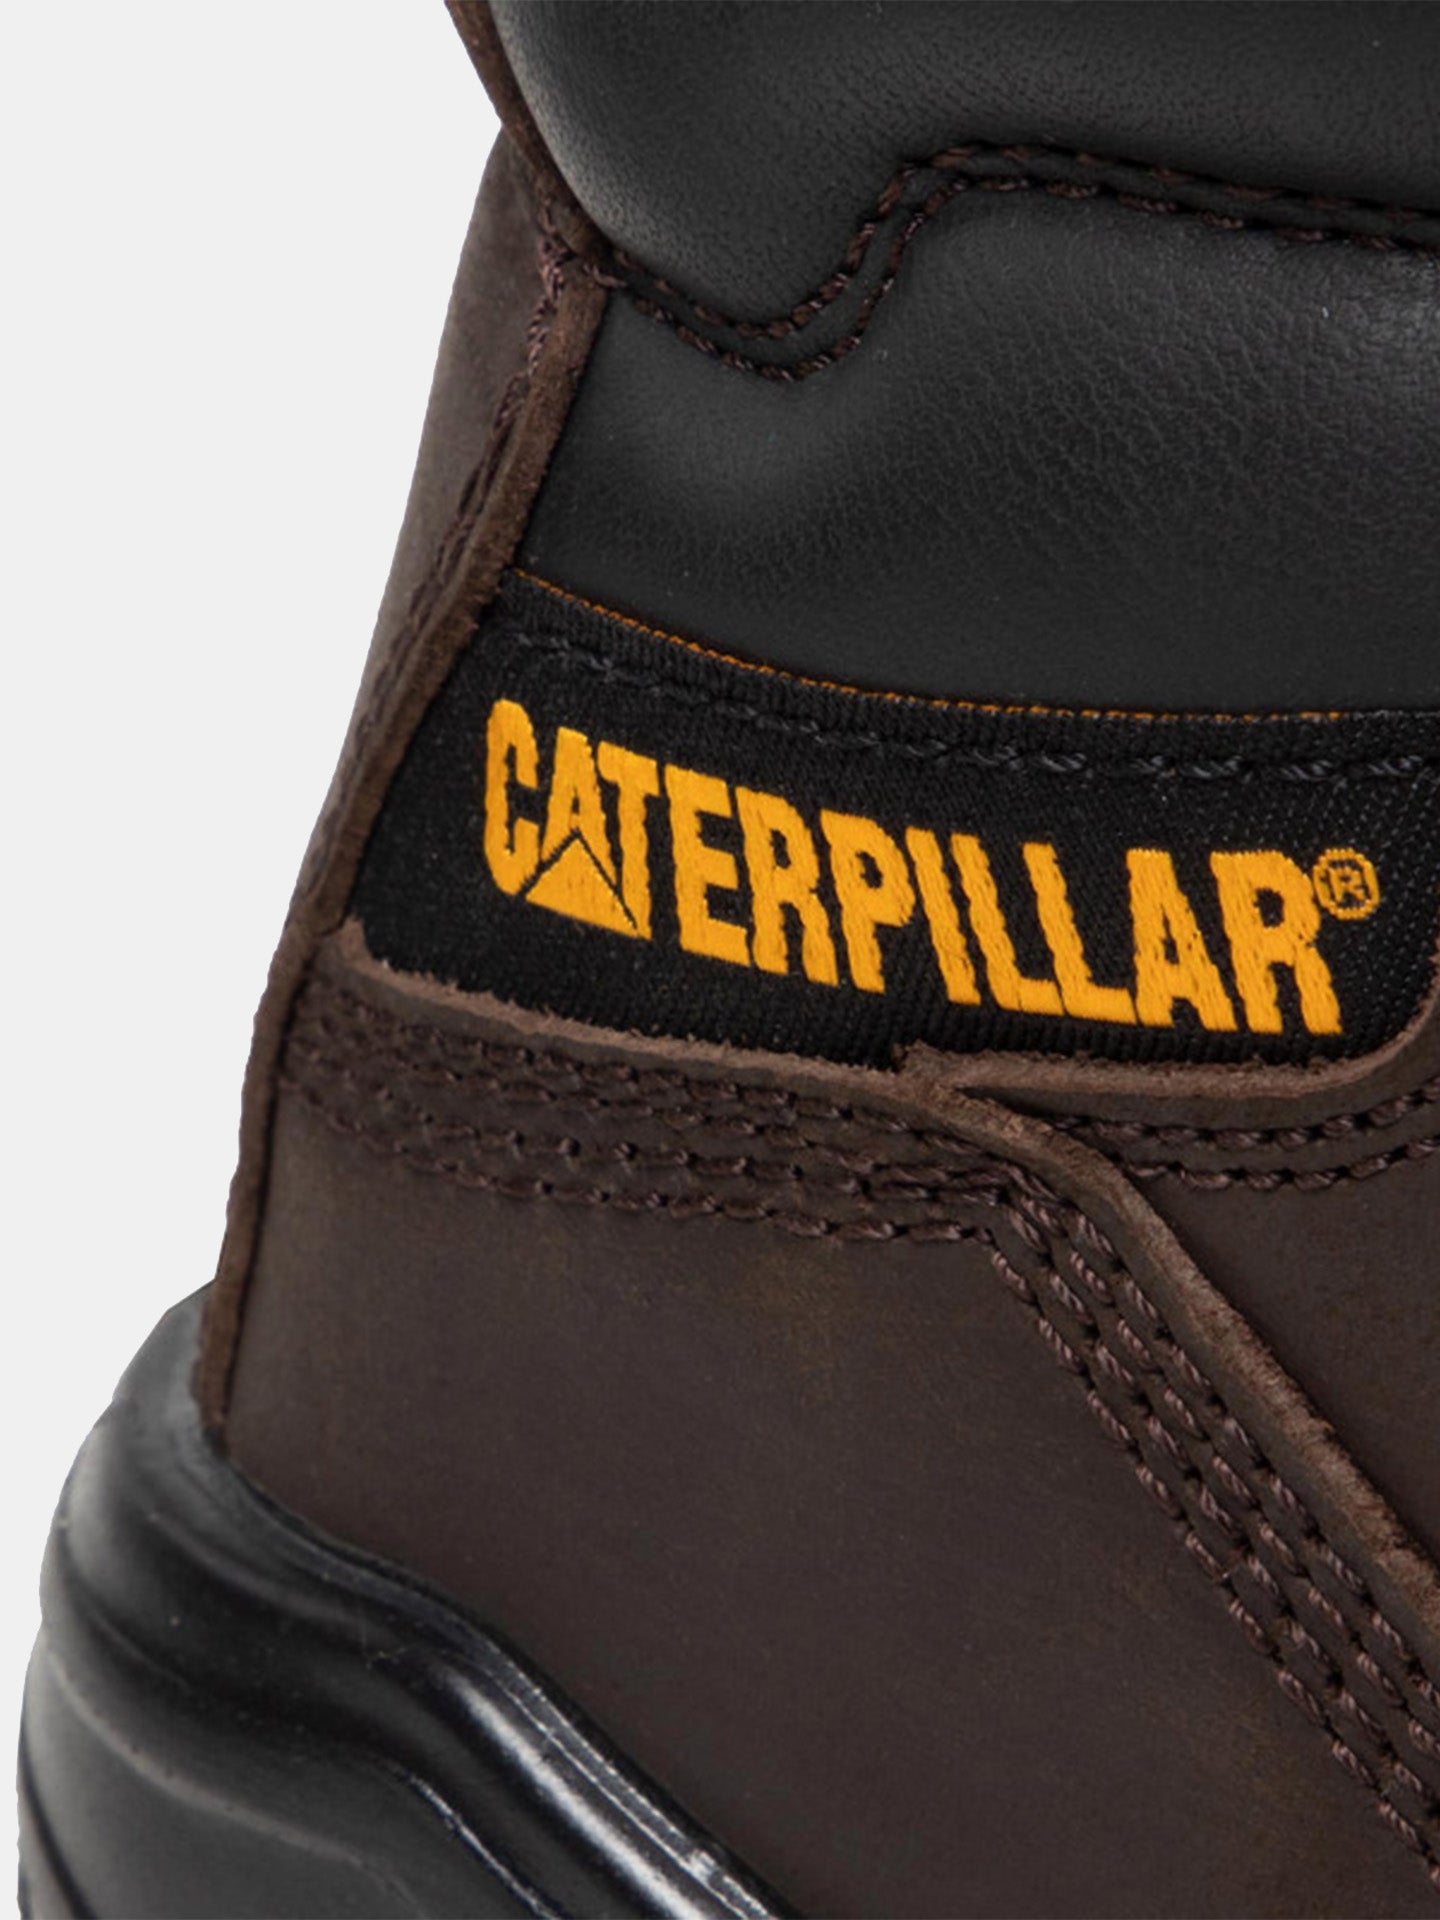 Caterpillar Men's Striver Bump St S3 Safety Boots #color_Brown